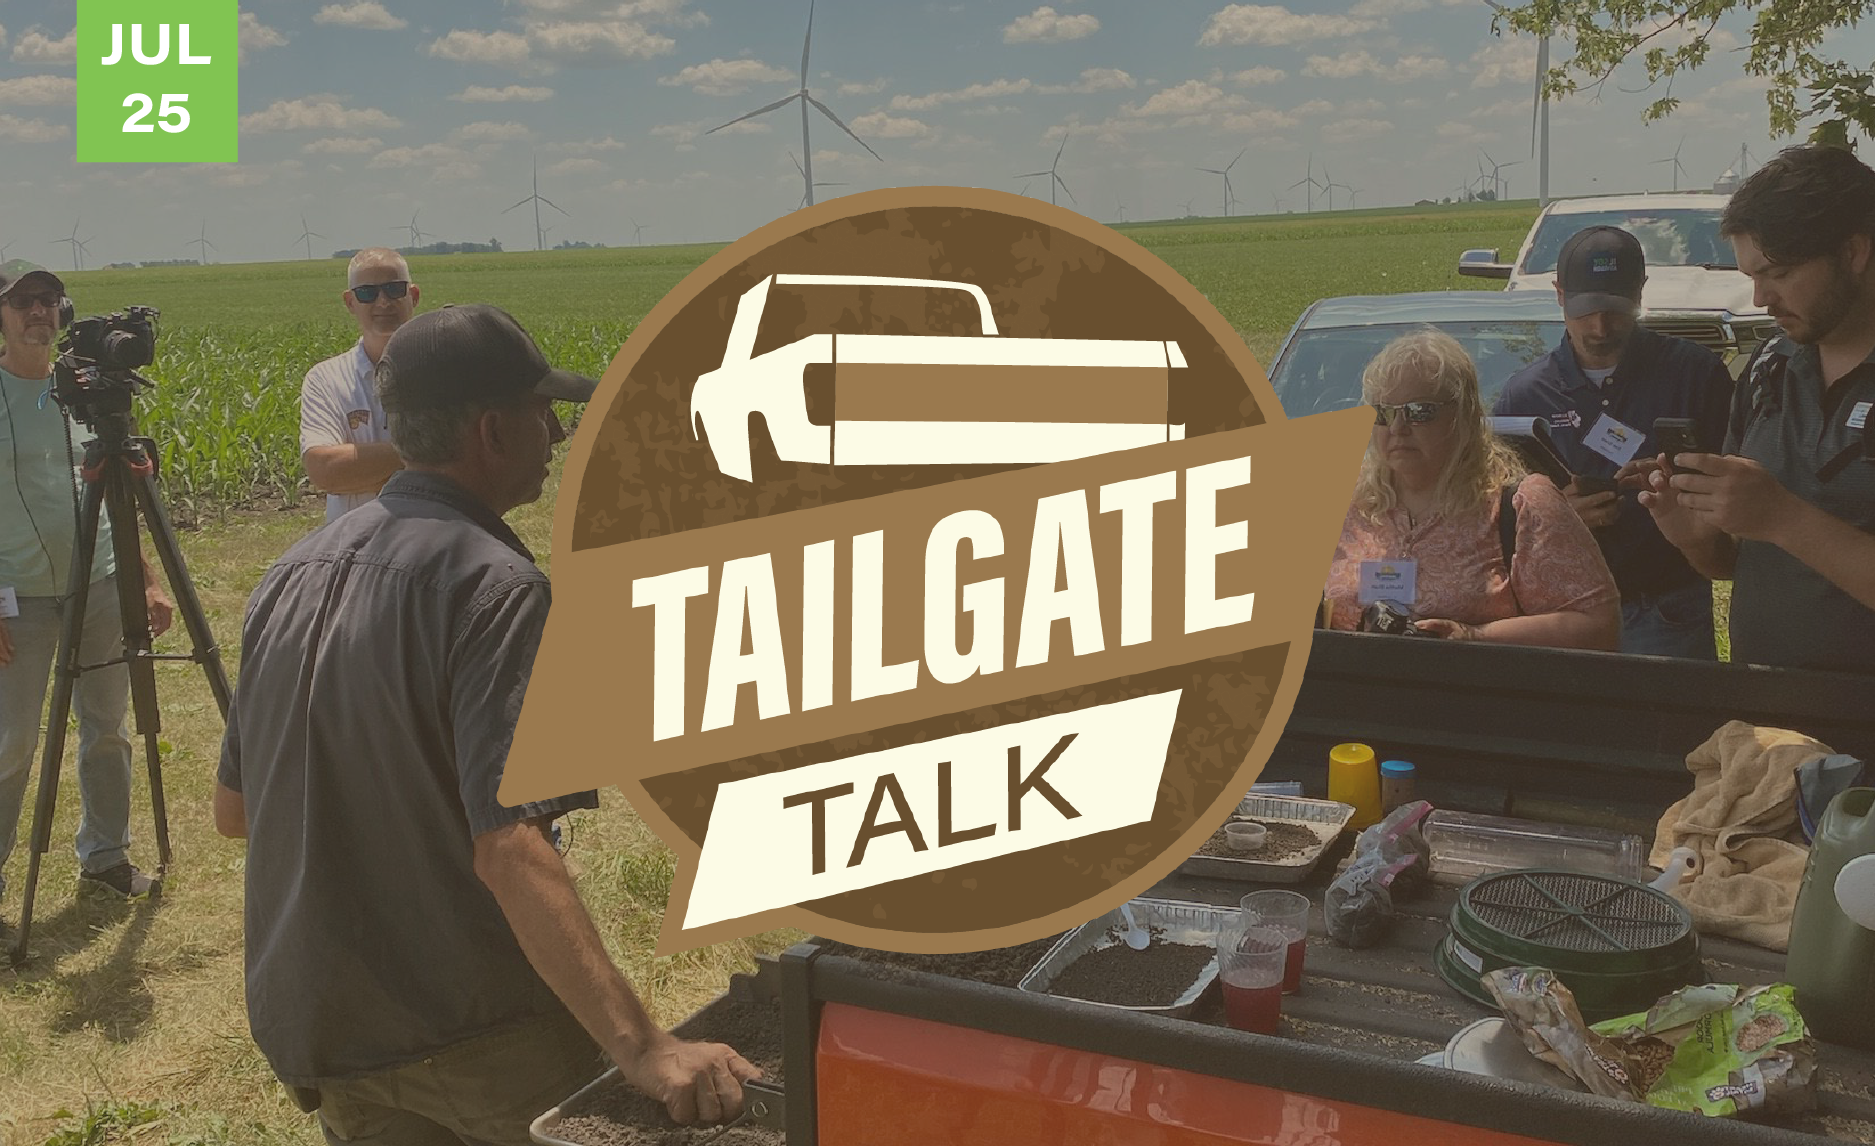 Tailgate Talk at Holst Farms Event